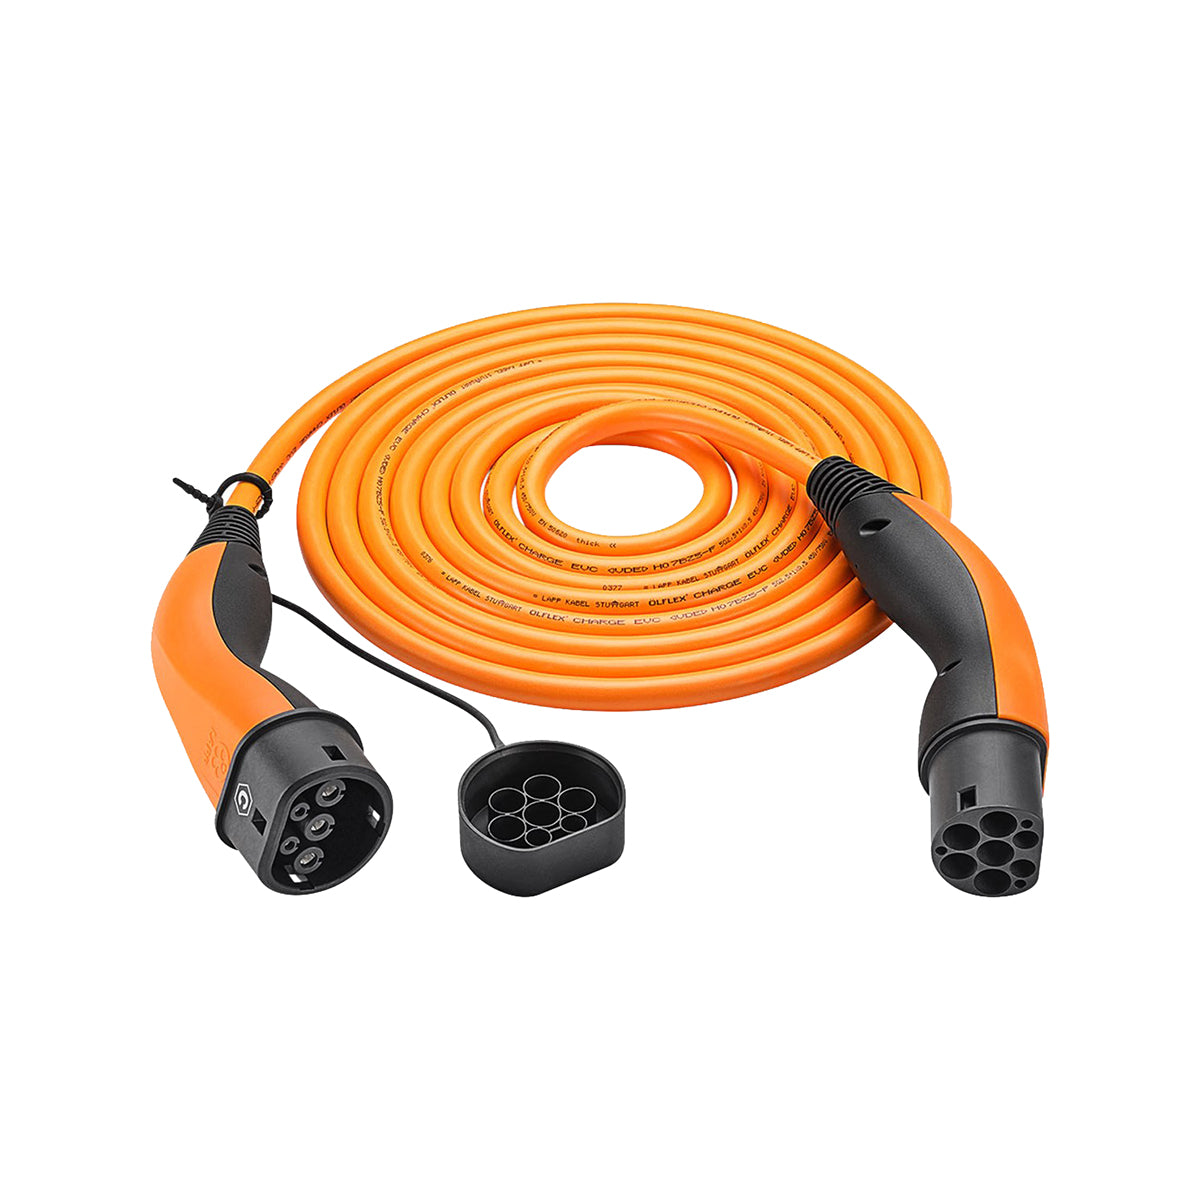 LAPP EV Helix Charge Cable Type 2 (7.4kW-1P-32A) 5m for Hybrid and Electric Cars - Orange.